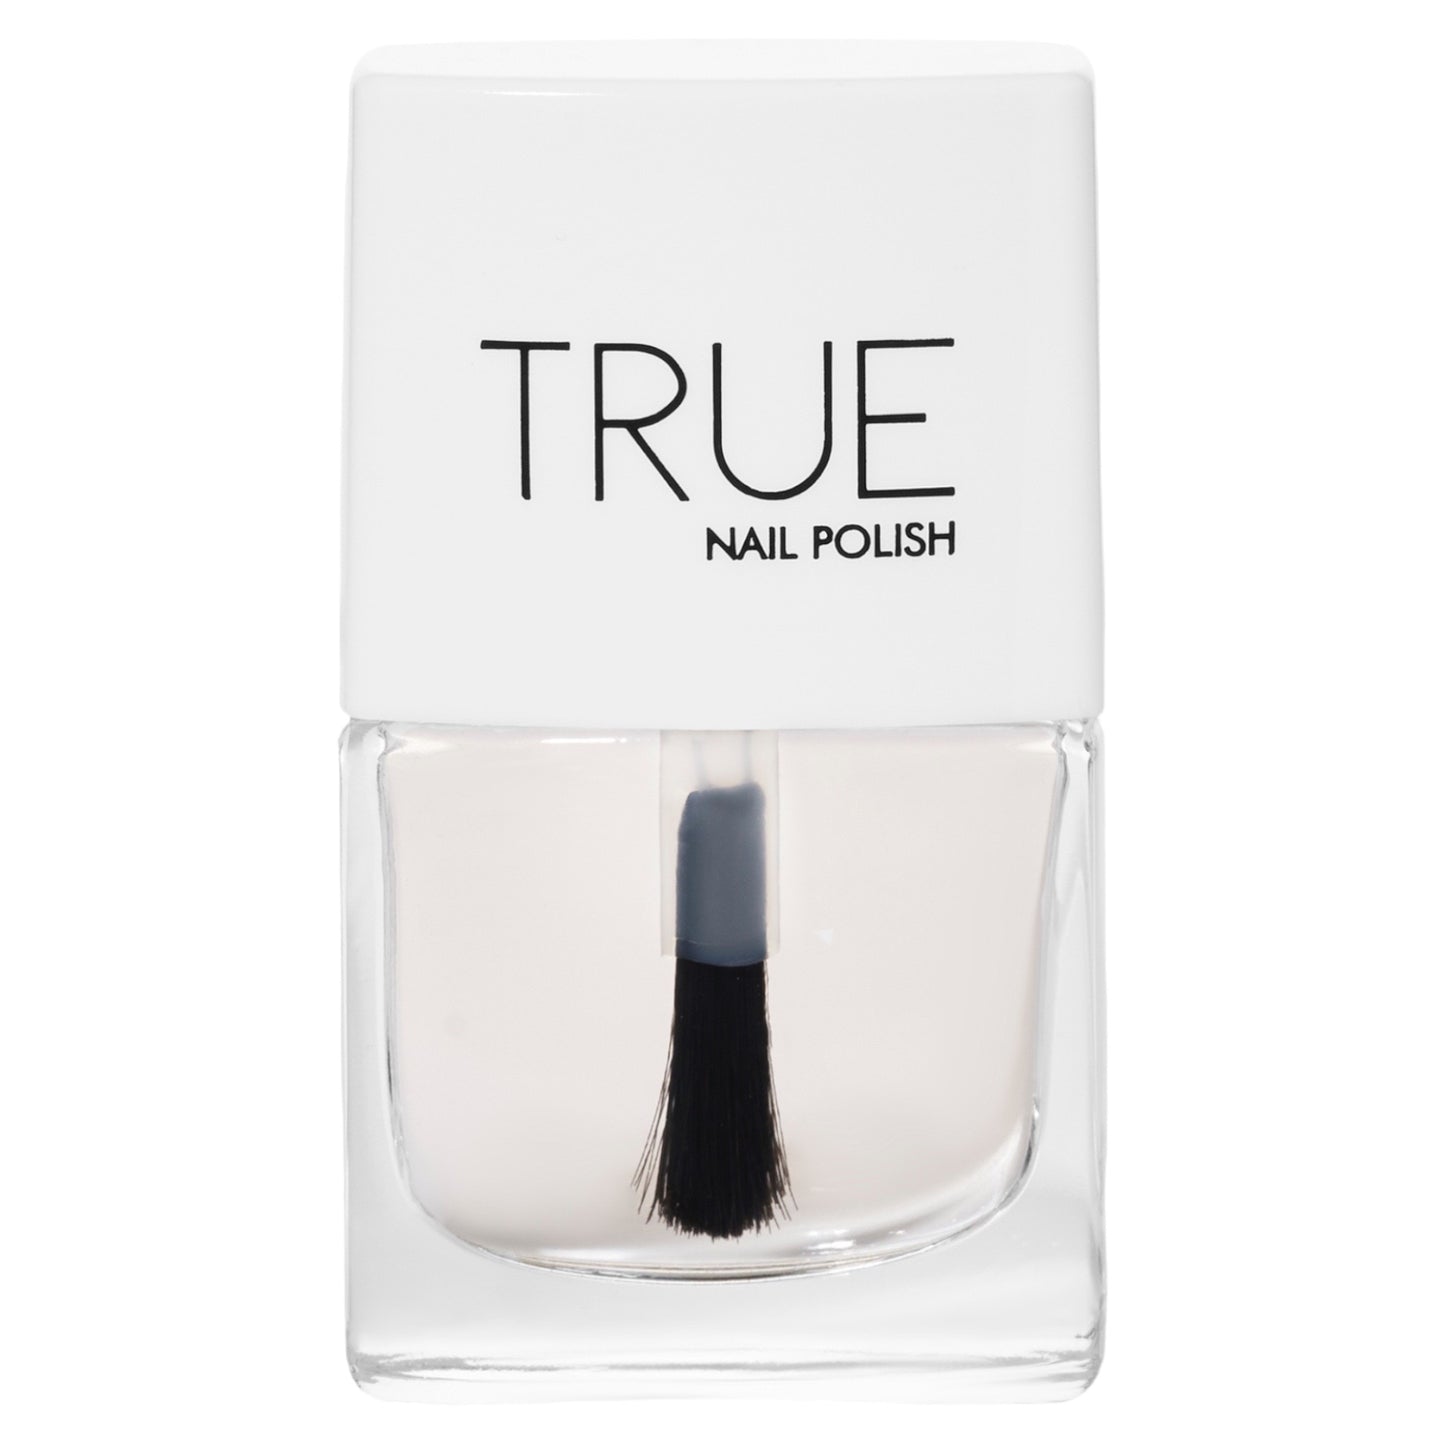 A bottle of High Gloss Top Coat, a clear shade from True Nail Polish that provides a high shine finish 